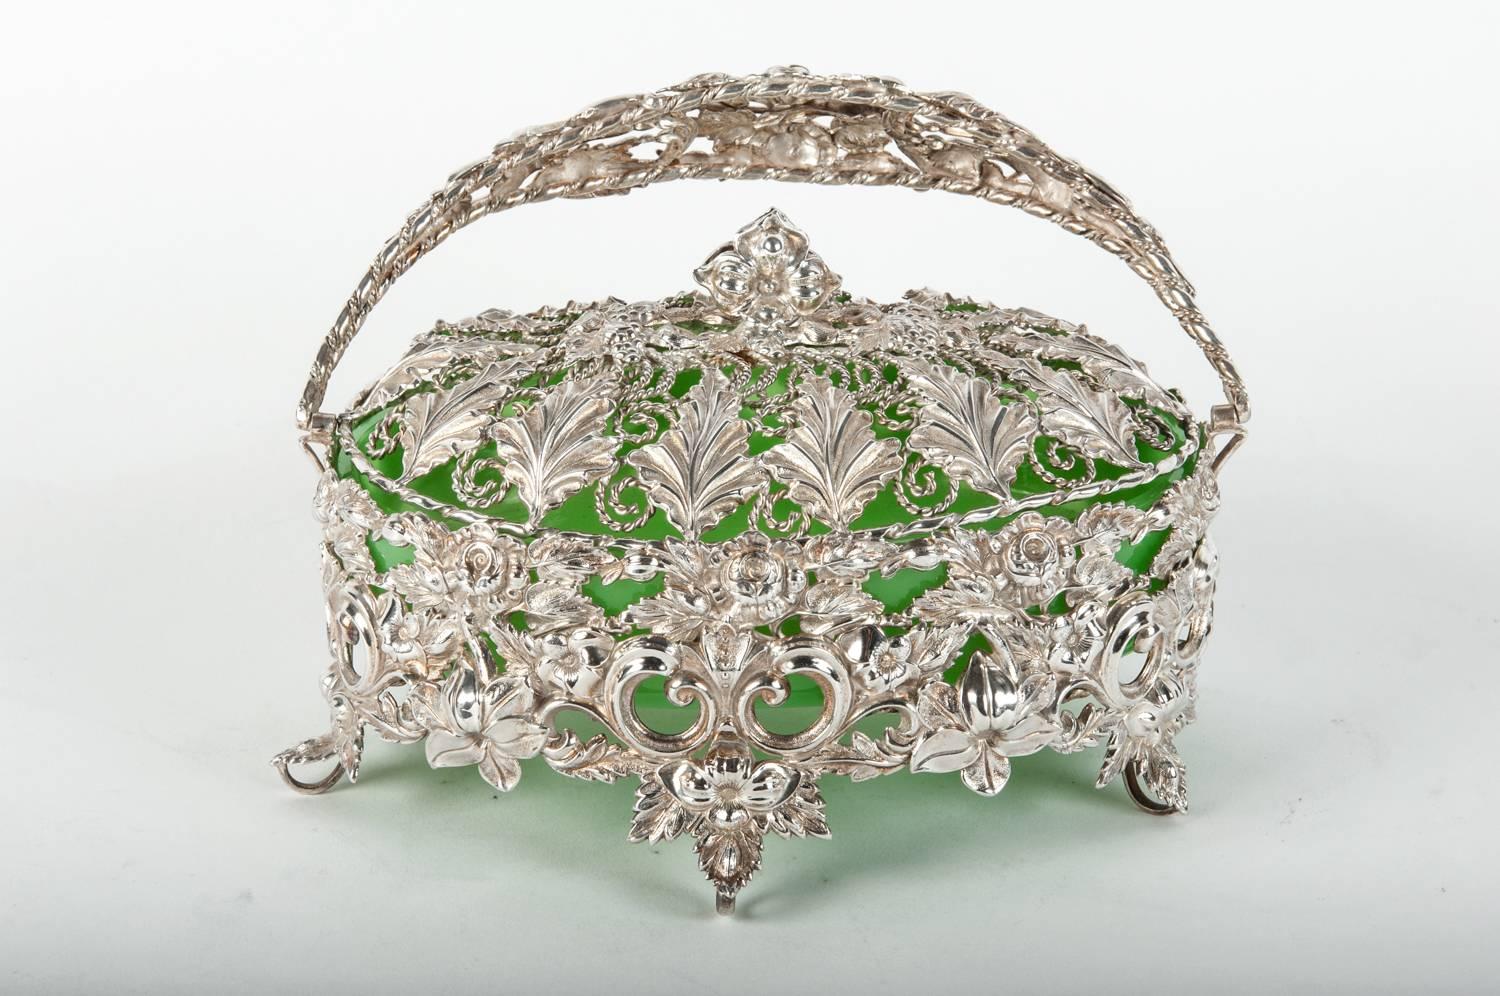 Antique English silver plated basket dish with celadon glass insert. The piece is in excellent antique condition. The dish measure 6.5 inches high X 7 inches diameter.